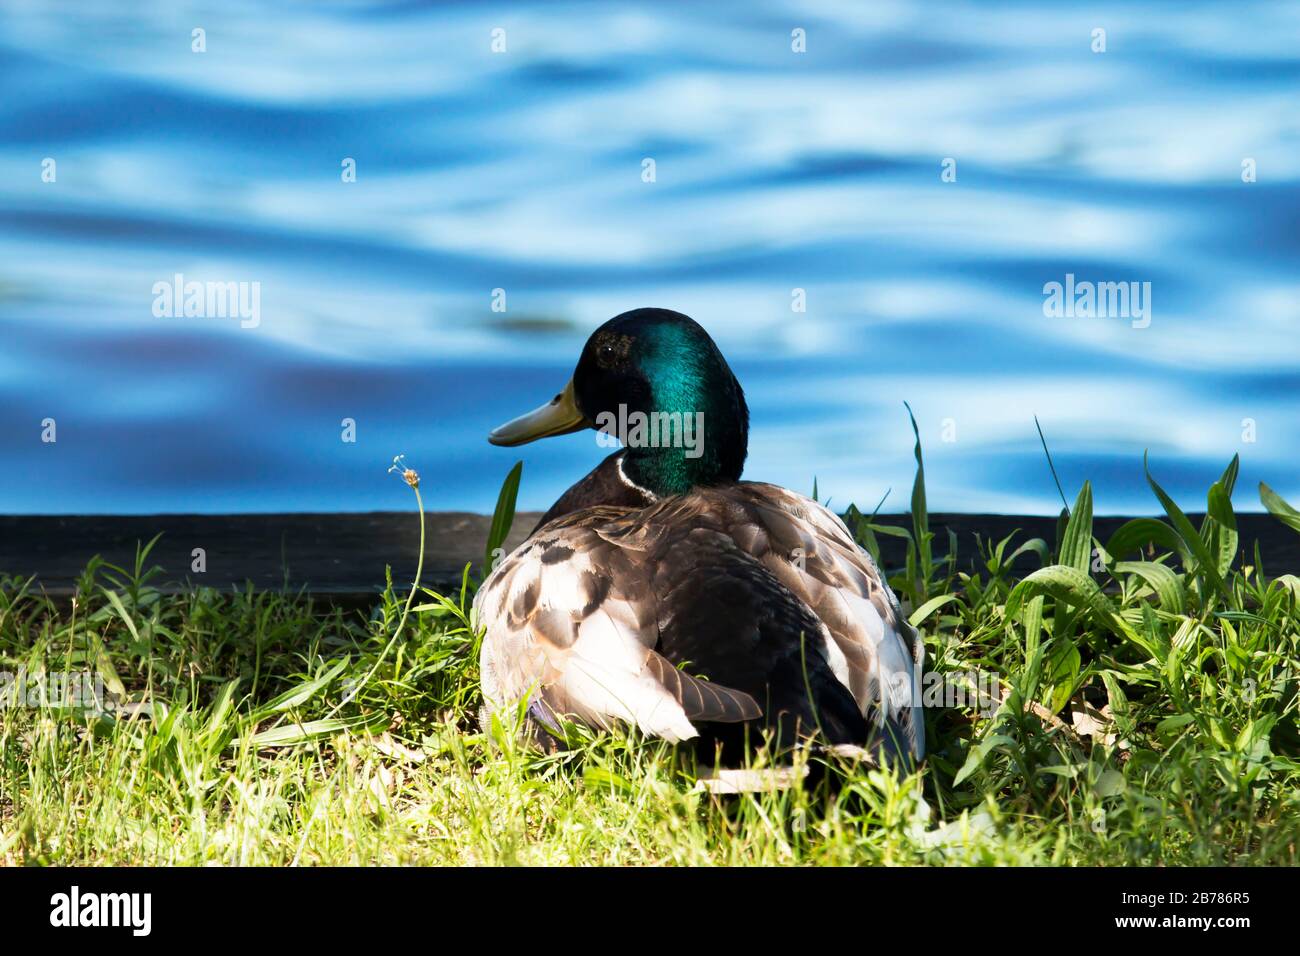 A mallard duck laying down and relaxing in the grass, on a beautiful sunny day, looking out over a blue lake Stock Photo